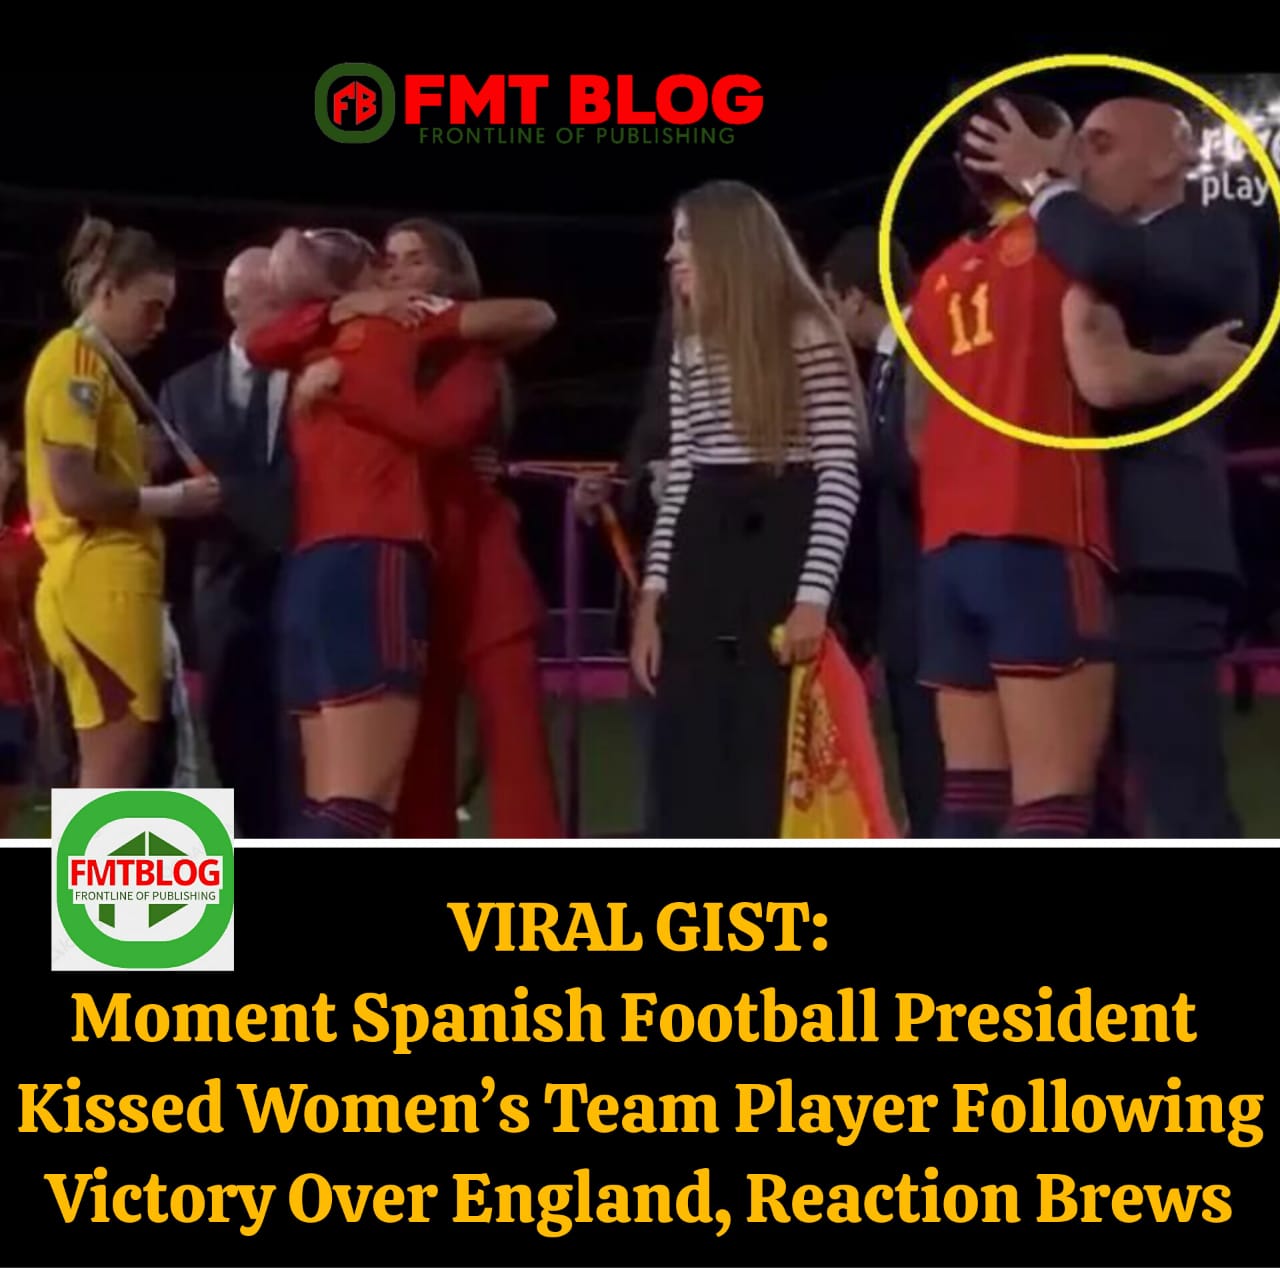 Moment Spanish Football President Kissed Women’s Player Team Following Victory Over England, Reactions Brews (VIDEO)